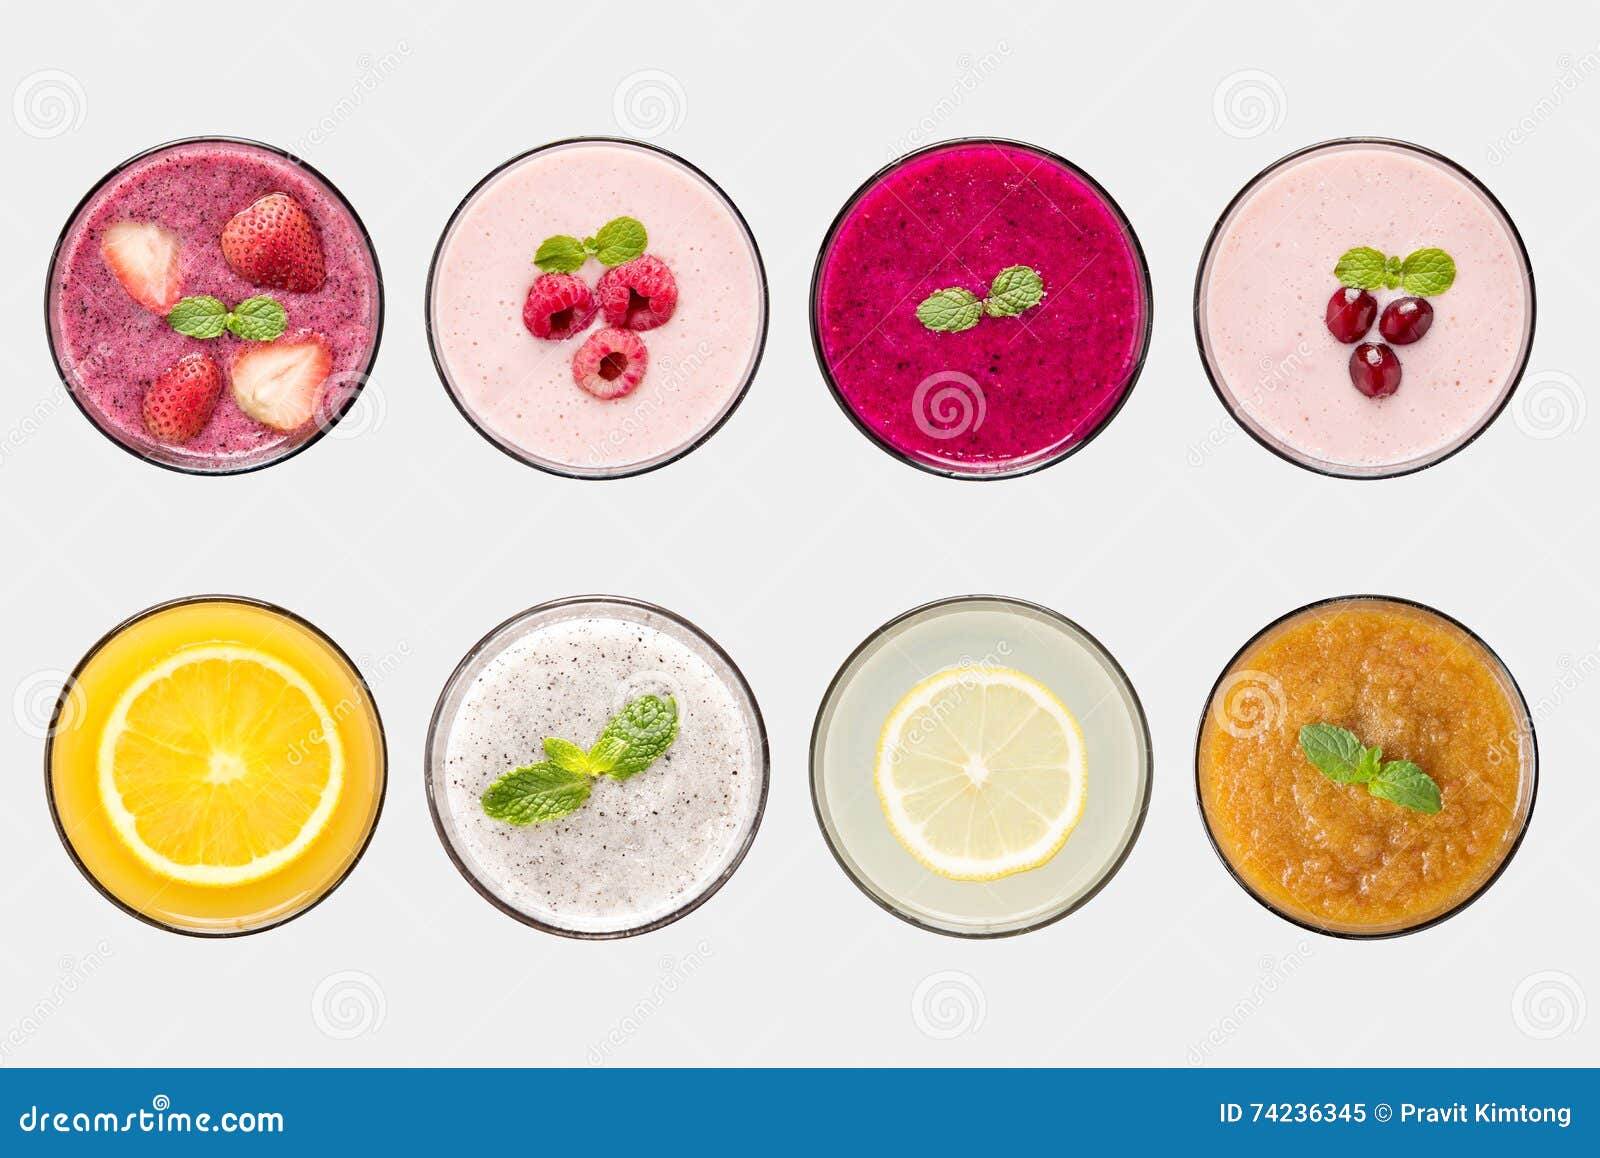 https://thumbs.dreamstime.com/z/design-concept-mockup-fruit-smoothie-fruit-juice-set-isolated-white-background-clipping-path-included-white-74236345.jpg